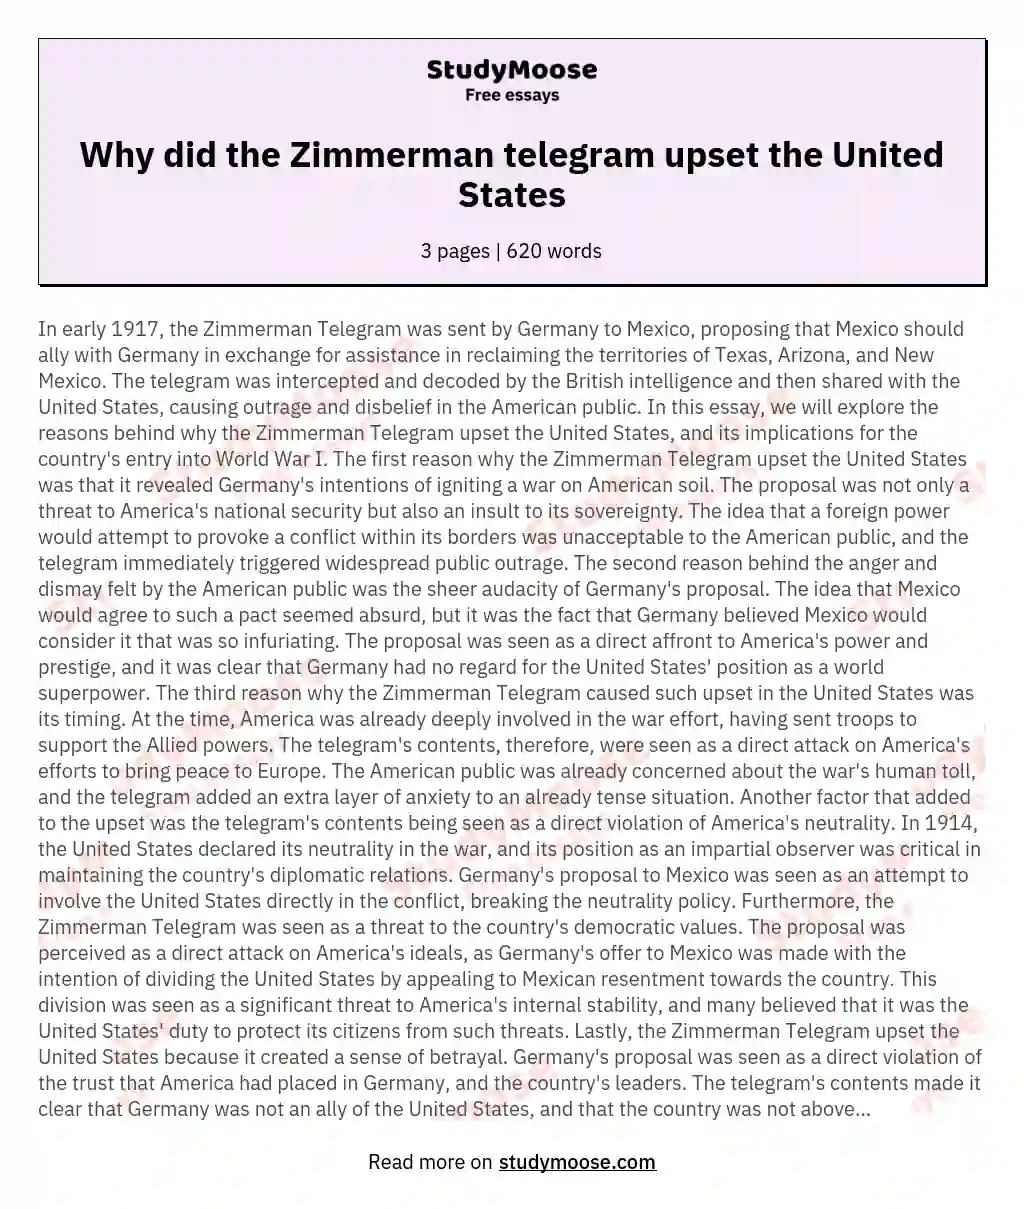 Why did the Zimmerman telegram upset the United States essay